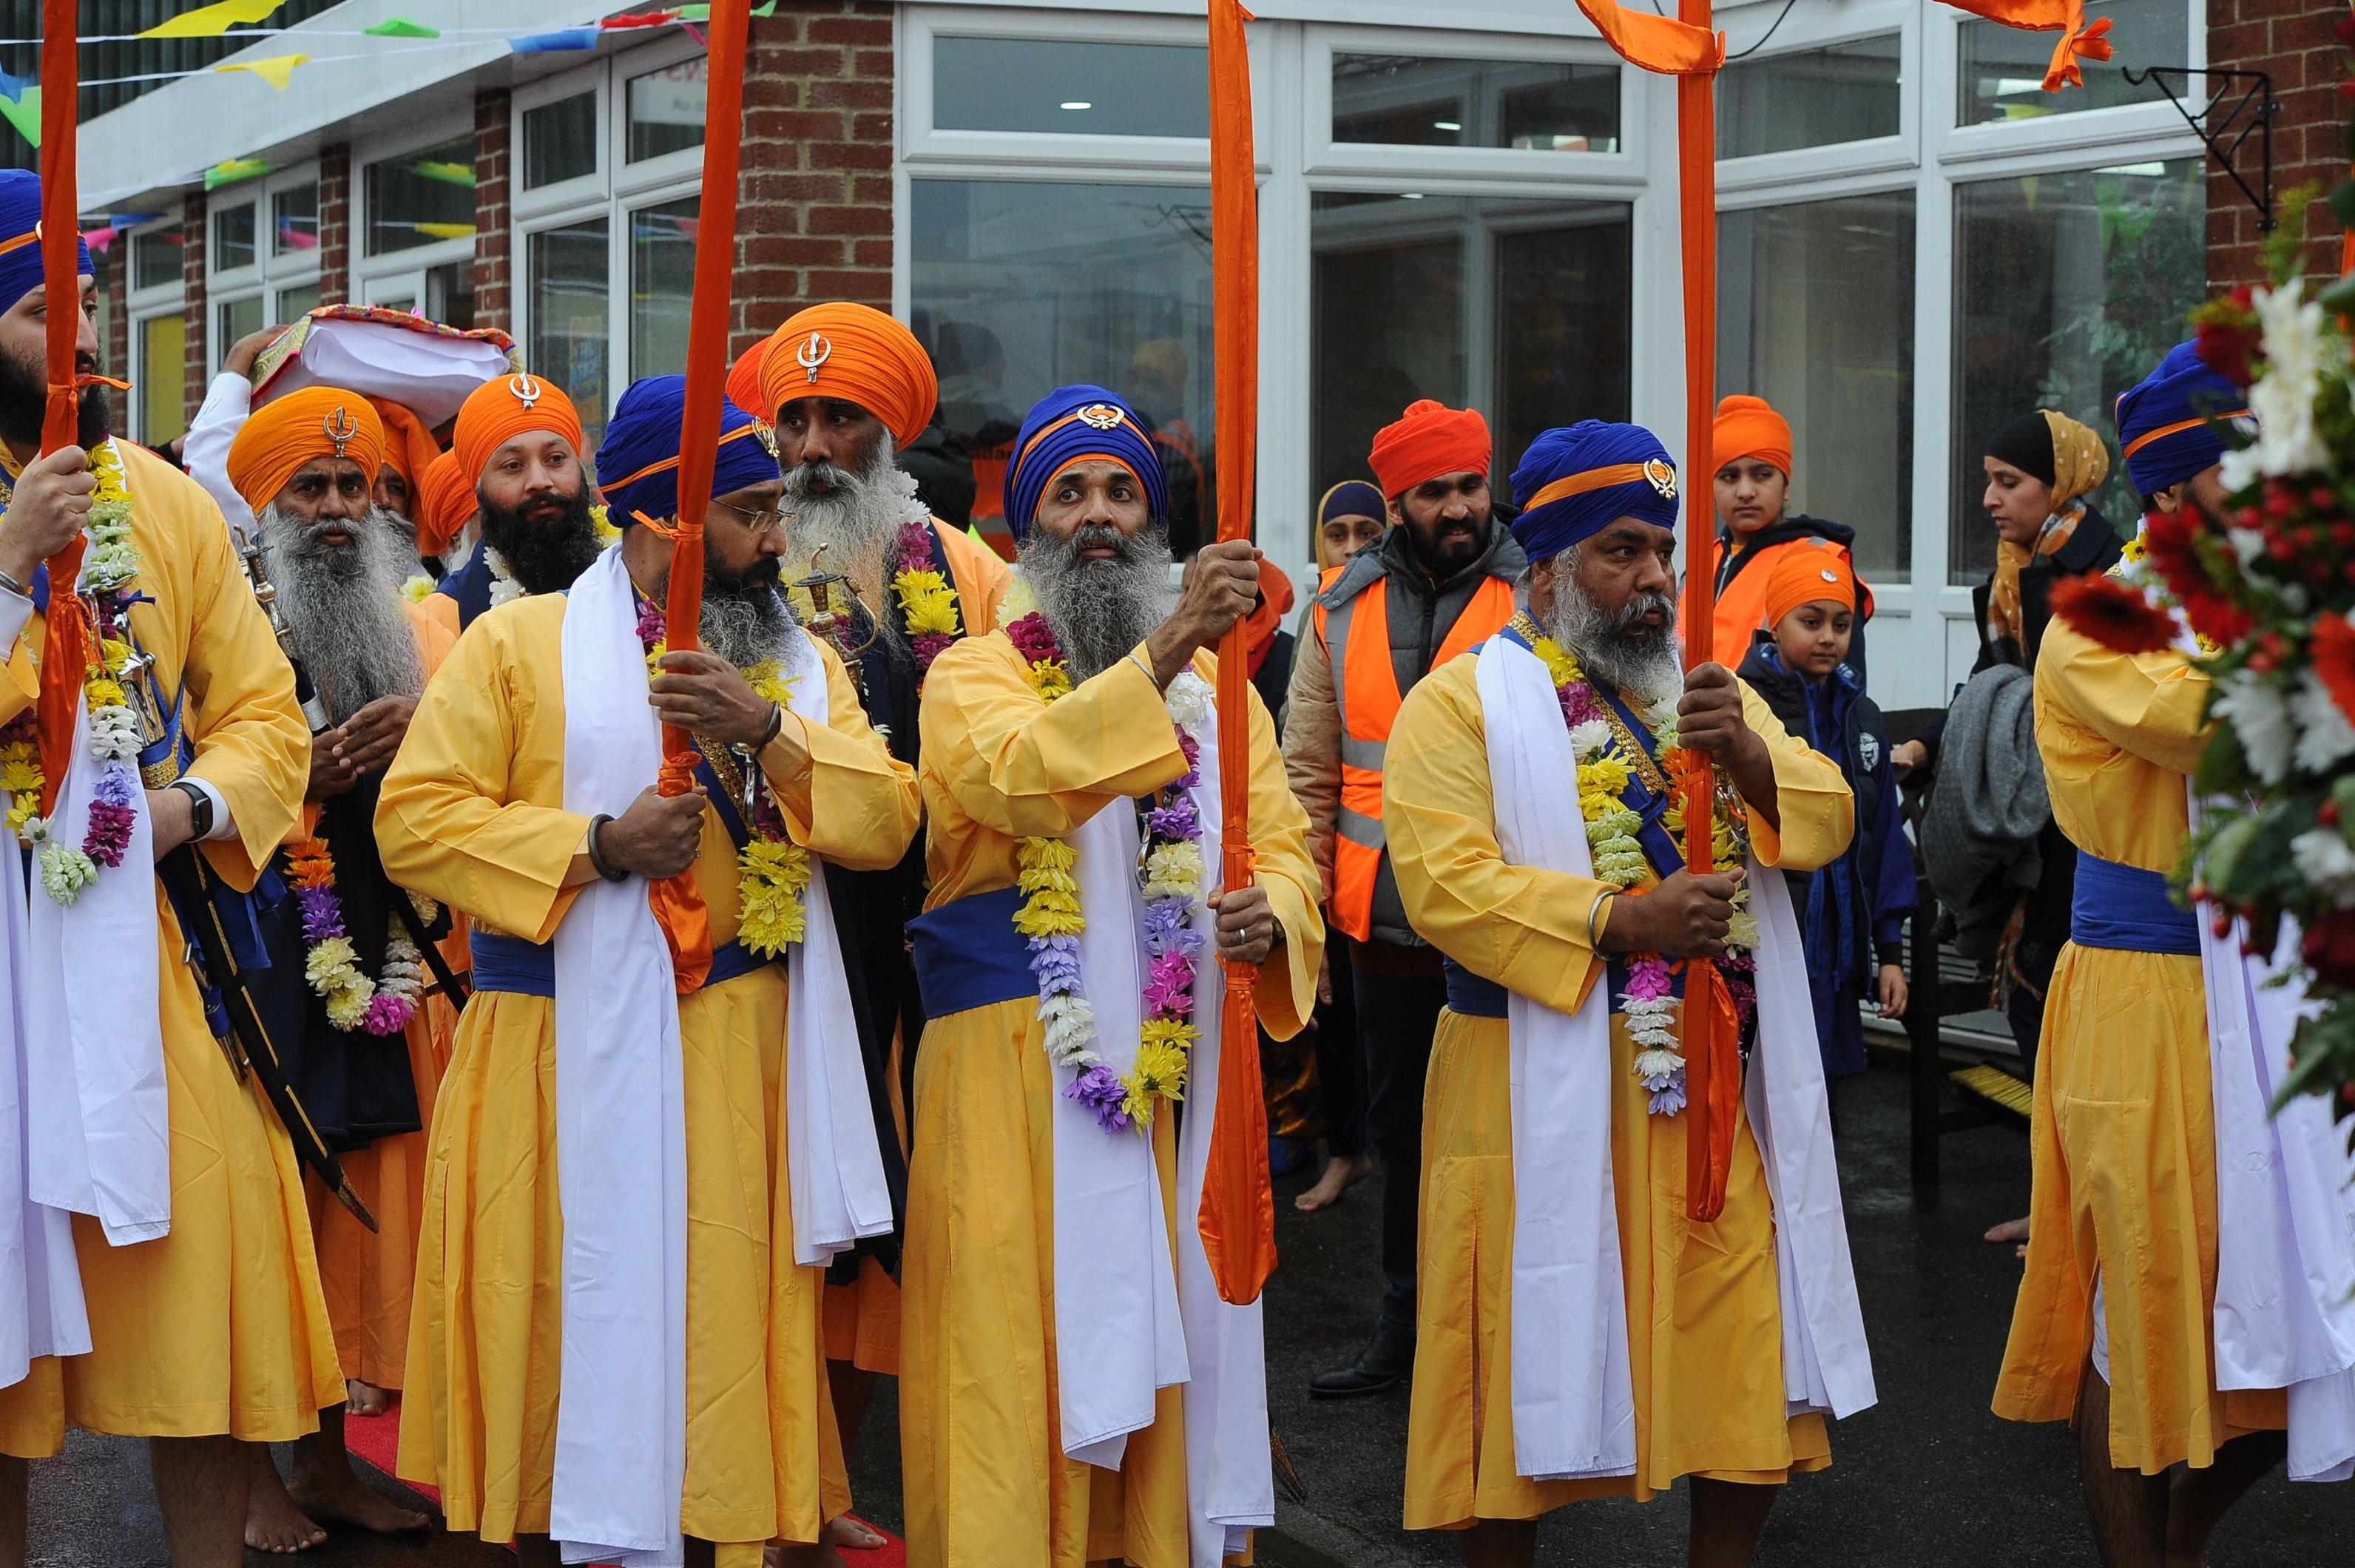 Colourful Peterborough parade as Sikhs celebrate holy day